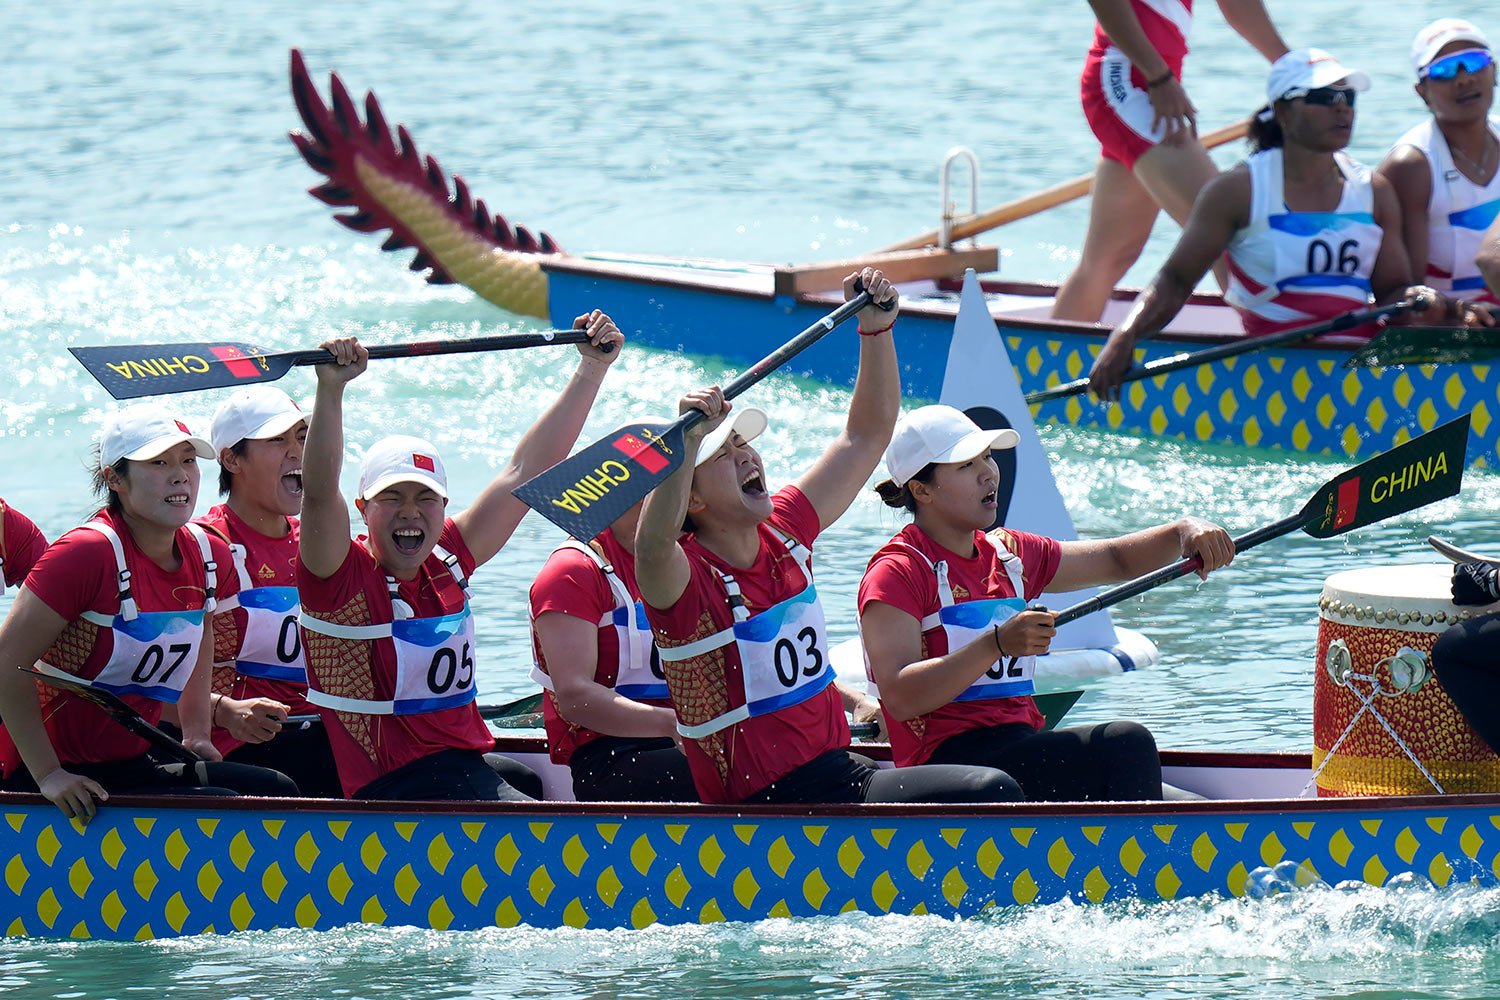  China's dragon boat team celebrates after finishing first in the Women's Dragon Boat 200m Grand Final during the 19th Asian Games at the Wenzhou Dragon Boat Center in Wenzhou, China, Wednesday, Oct. 4, 2023. (AP Photo/Eugene Hoshiko) 